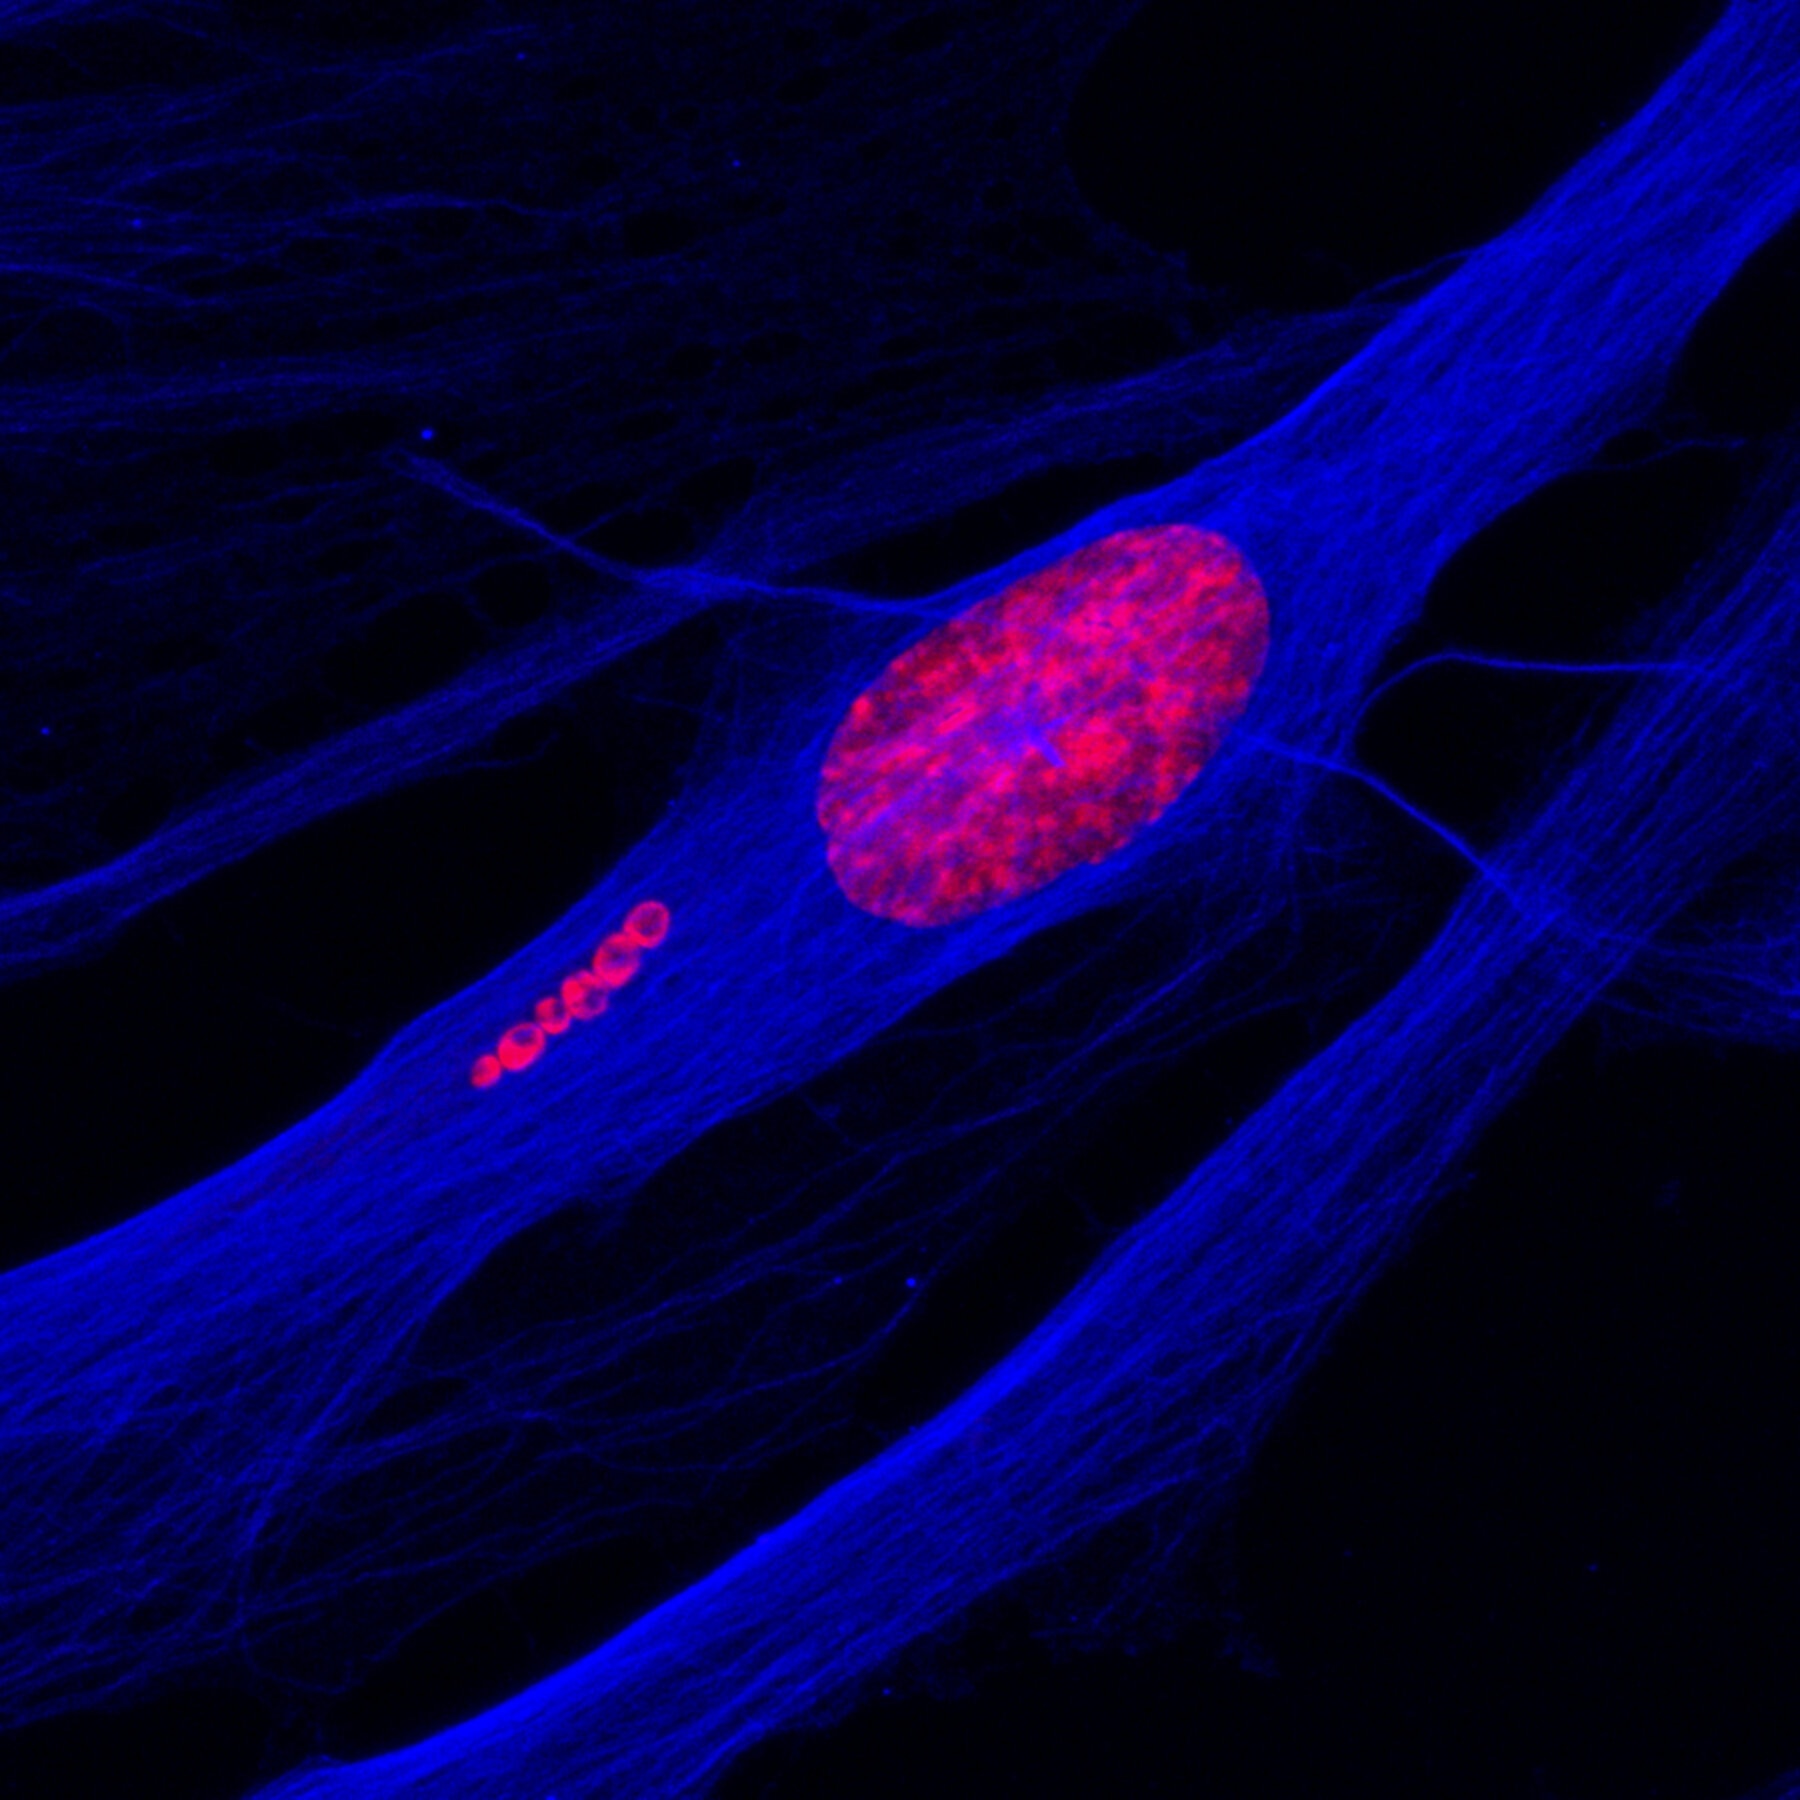 The photo shows a human stem cell during the early stages of becoming a neuron. The DNA is coloured in red, and the cell skeleton in blue. In the image you can see show six spherical particles, containing DNA and therefore in red, moving away from the cell nucleus.